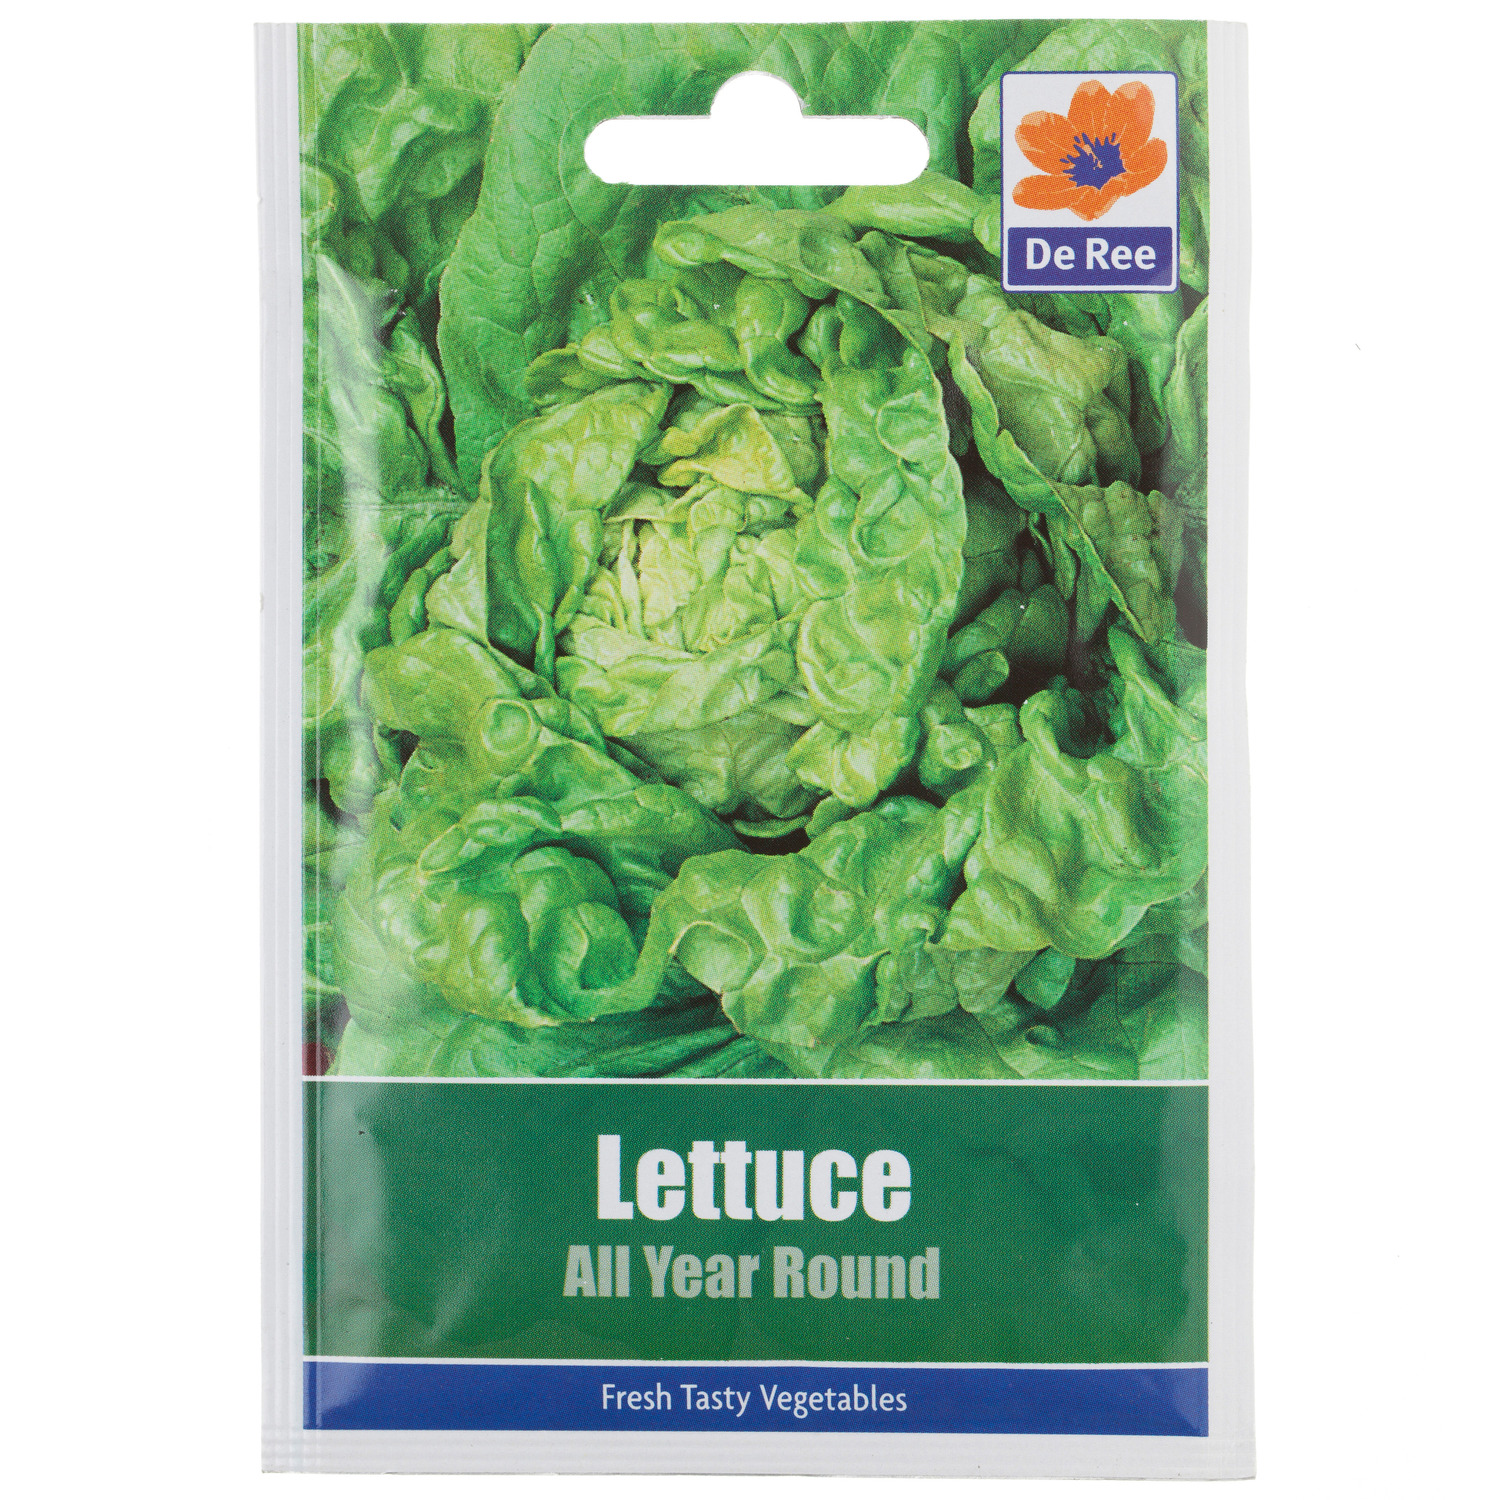 All Year Round Lettuce Seed Packet Image